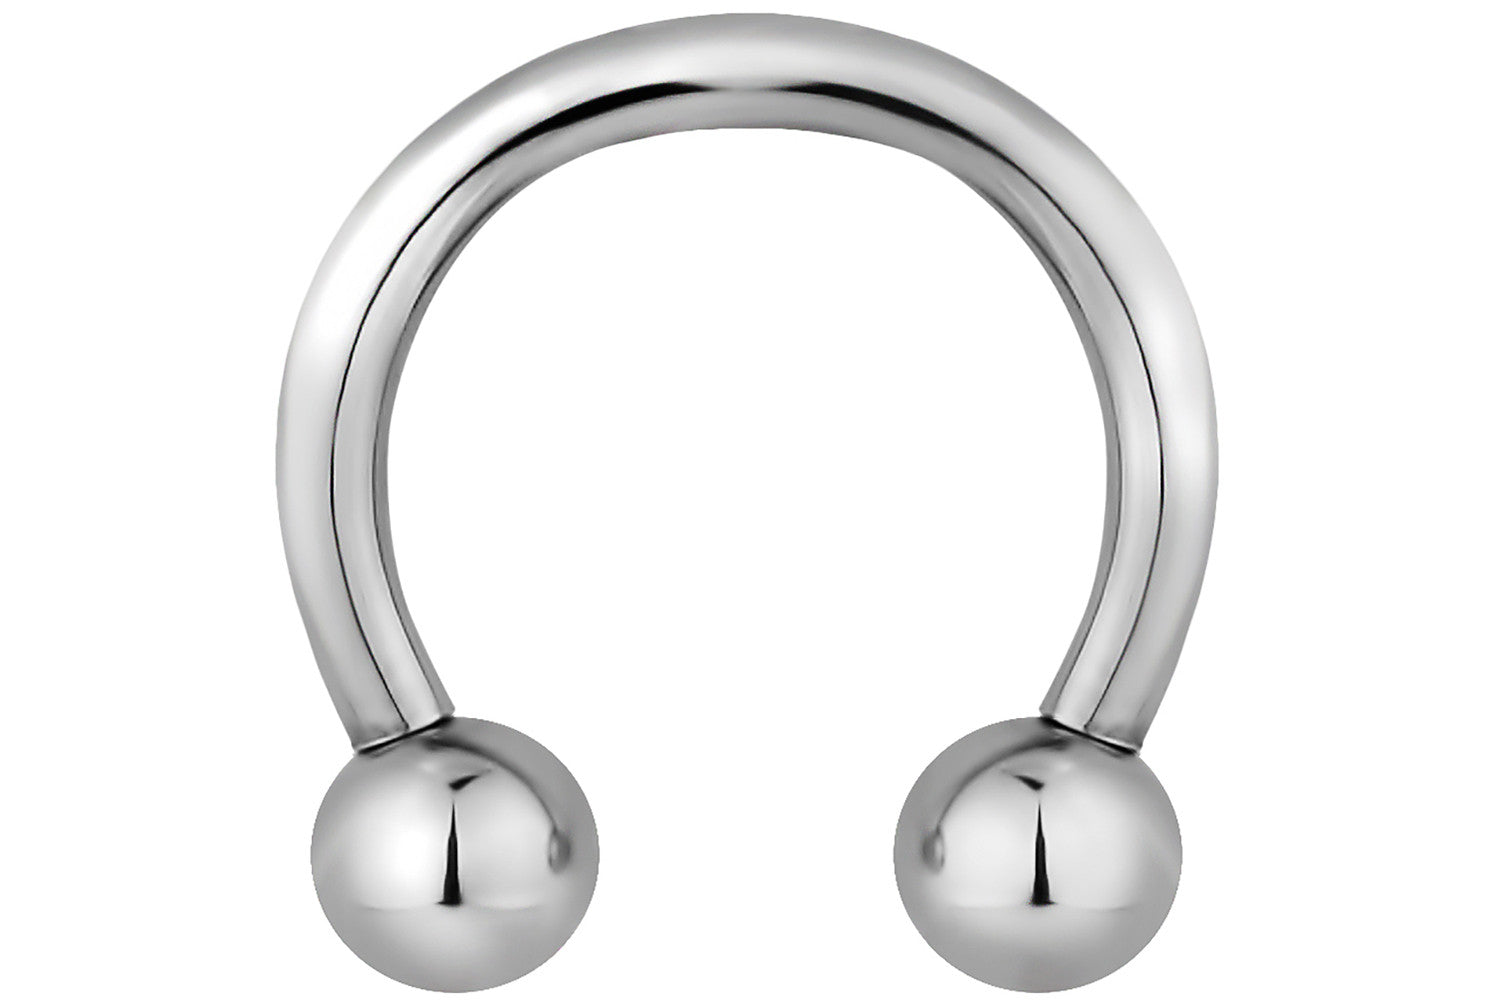 This 14 gauge horseshoe body piercing ring is internally threaded for maximum comfort and ease of use. It is made with surgical grade 316L Stainless Steel.